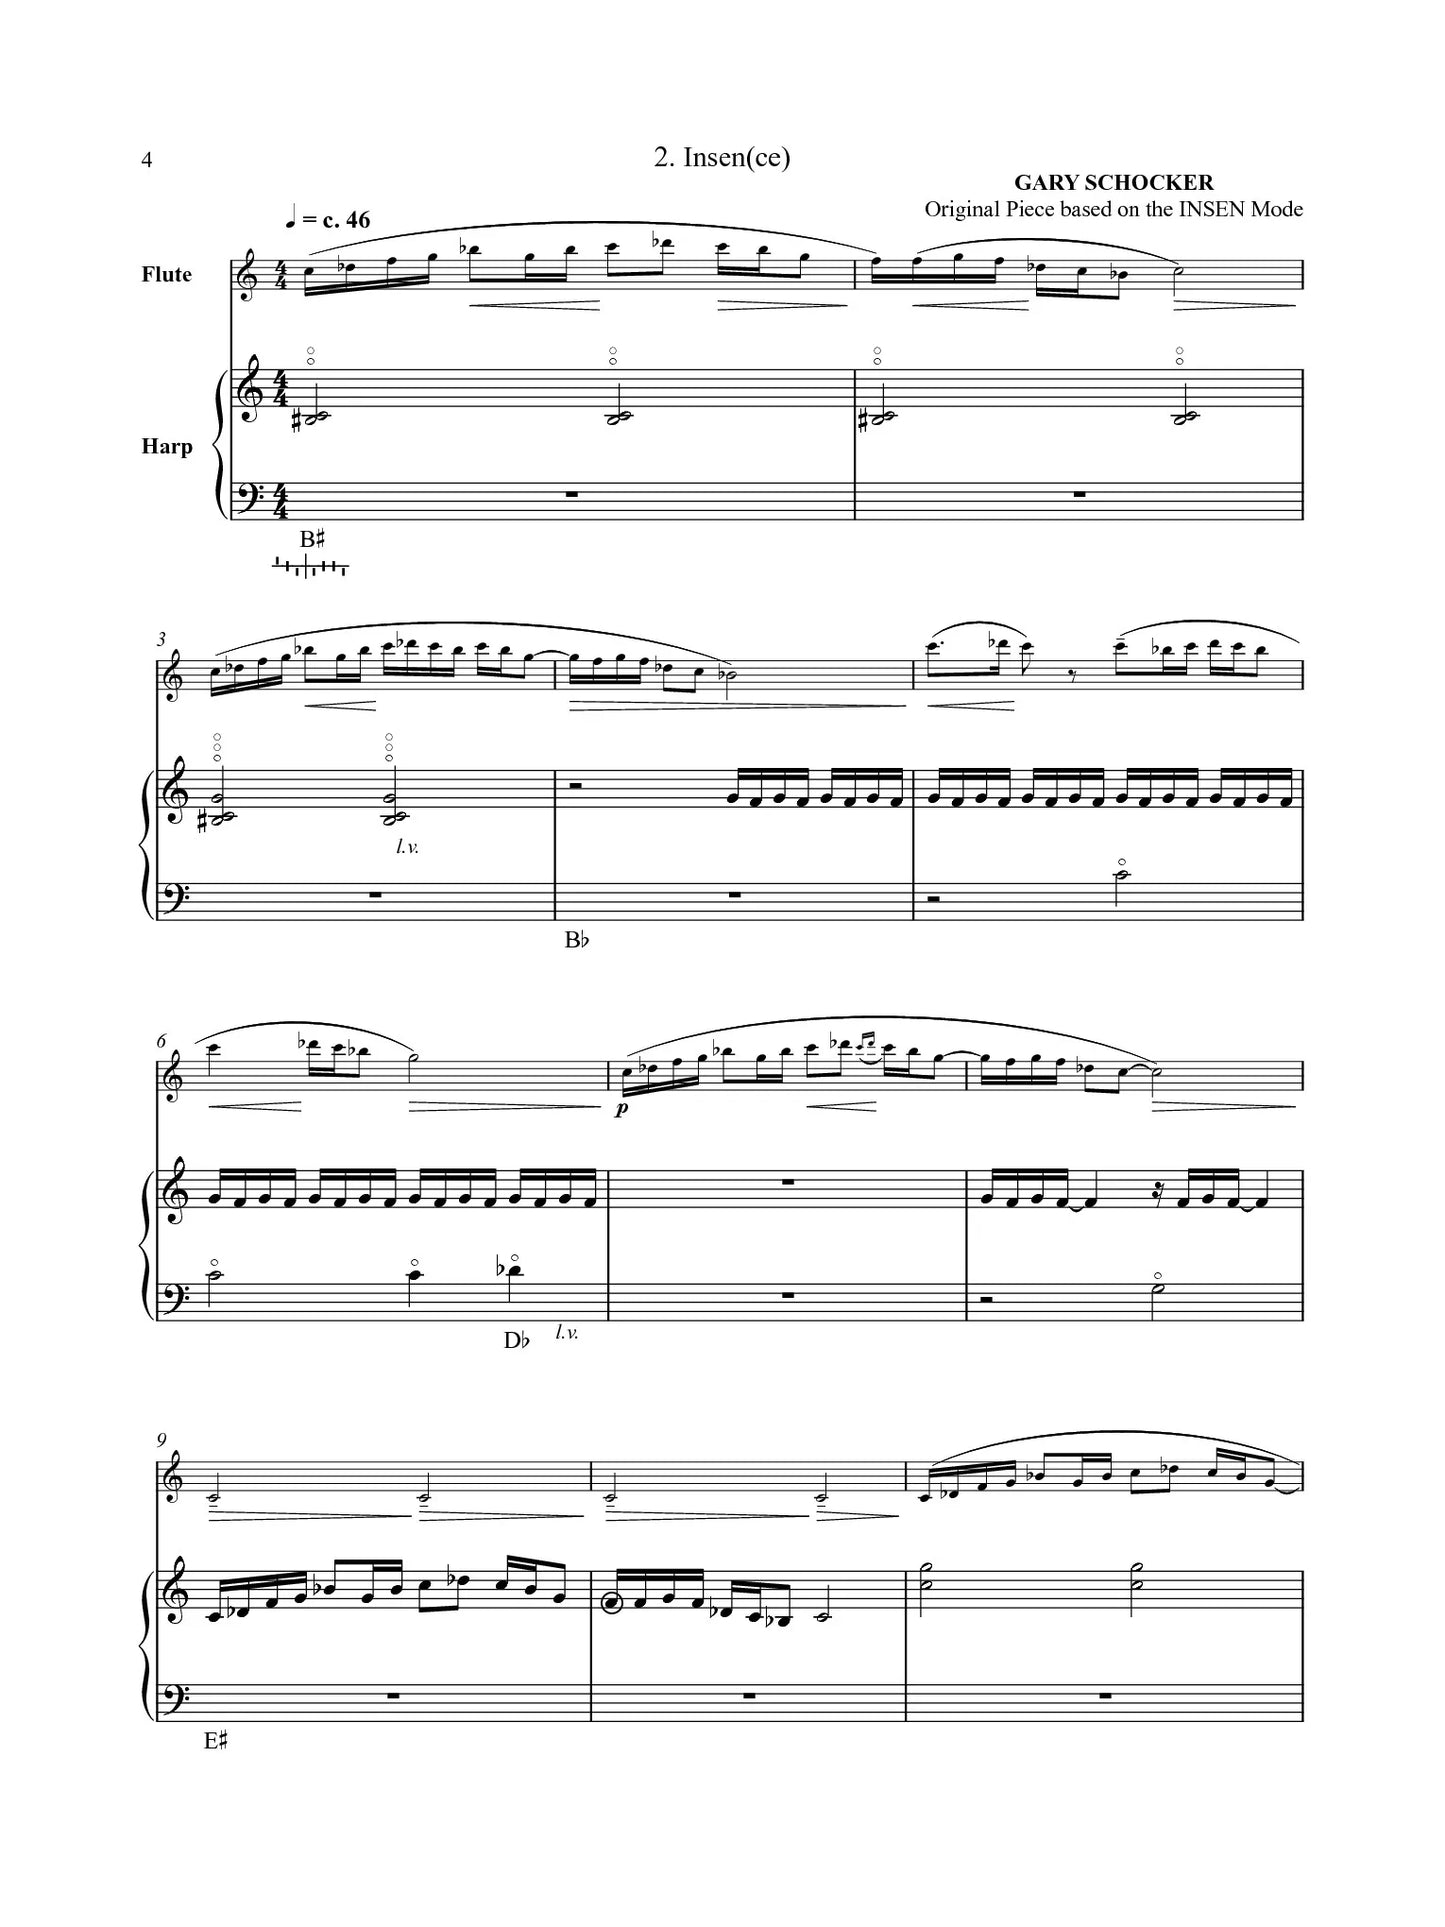 Schocker - 20 Japanese Melodies for Flute and Harp